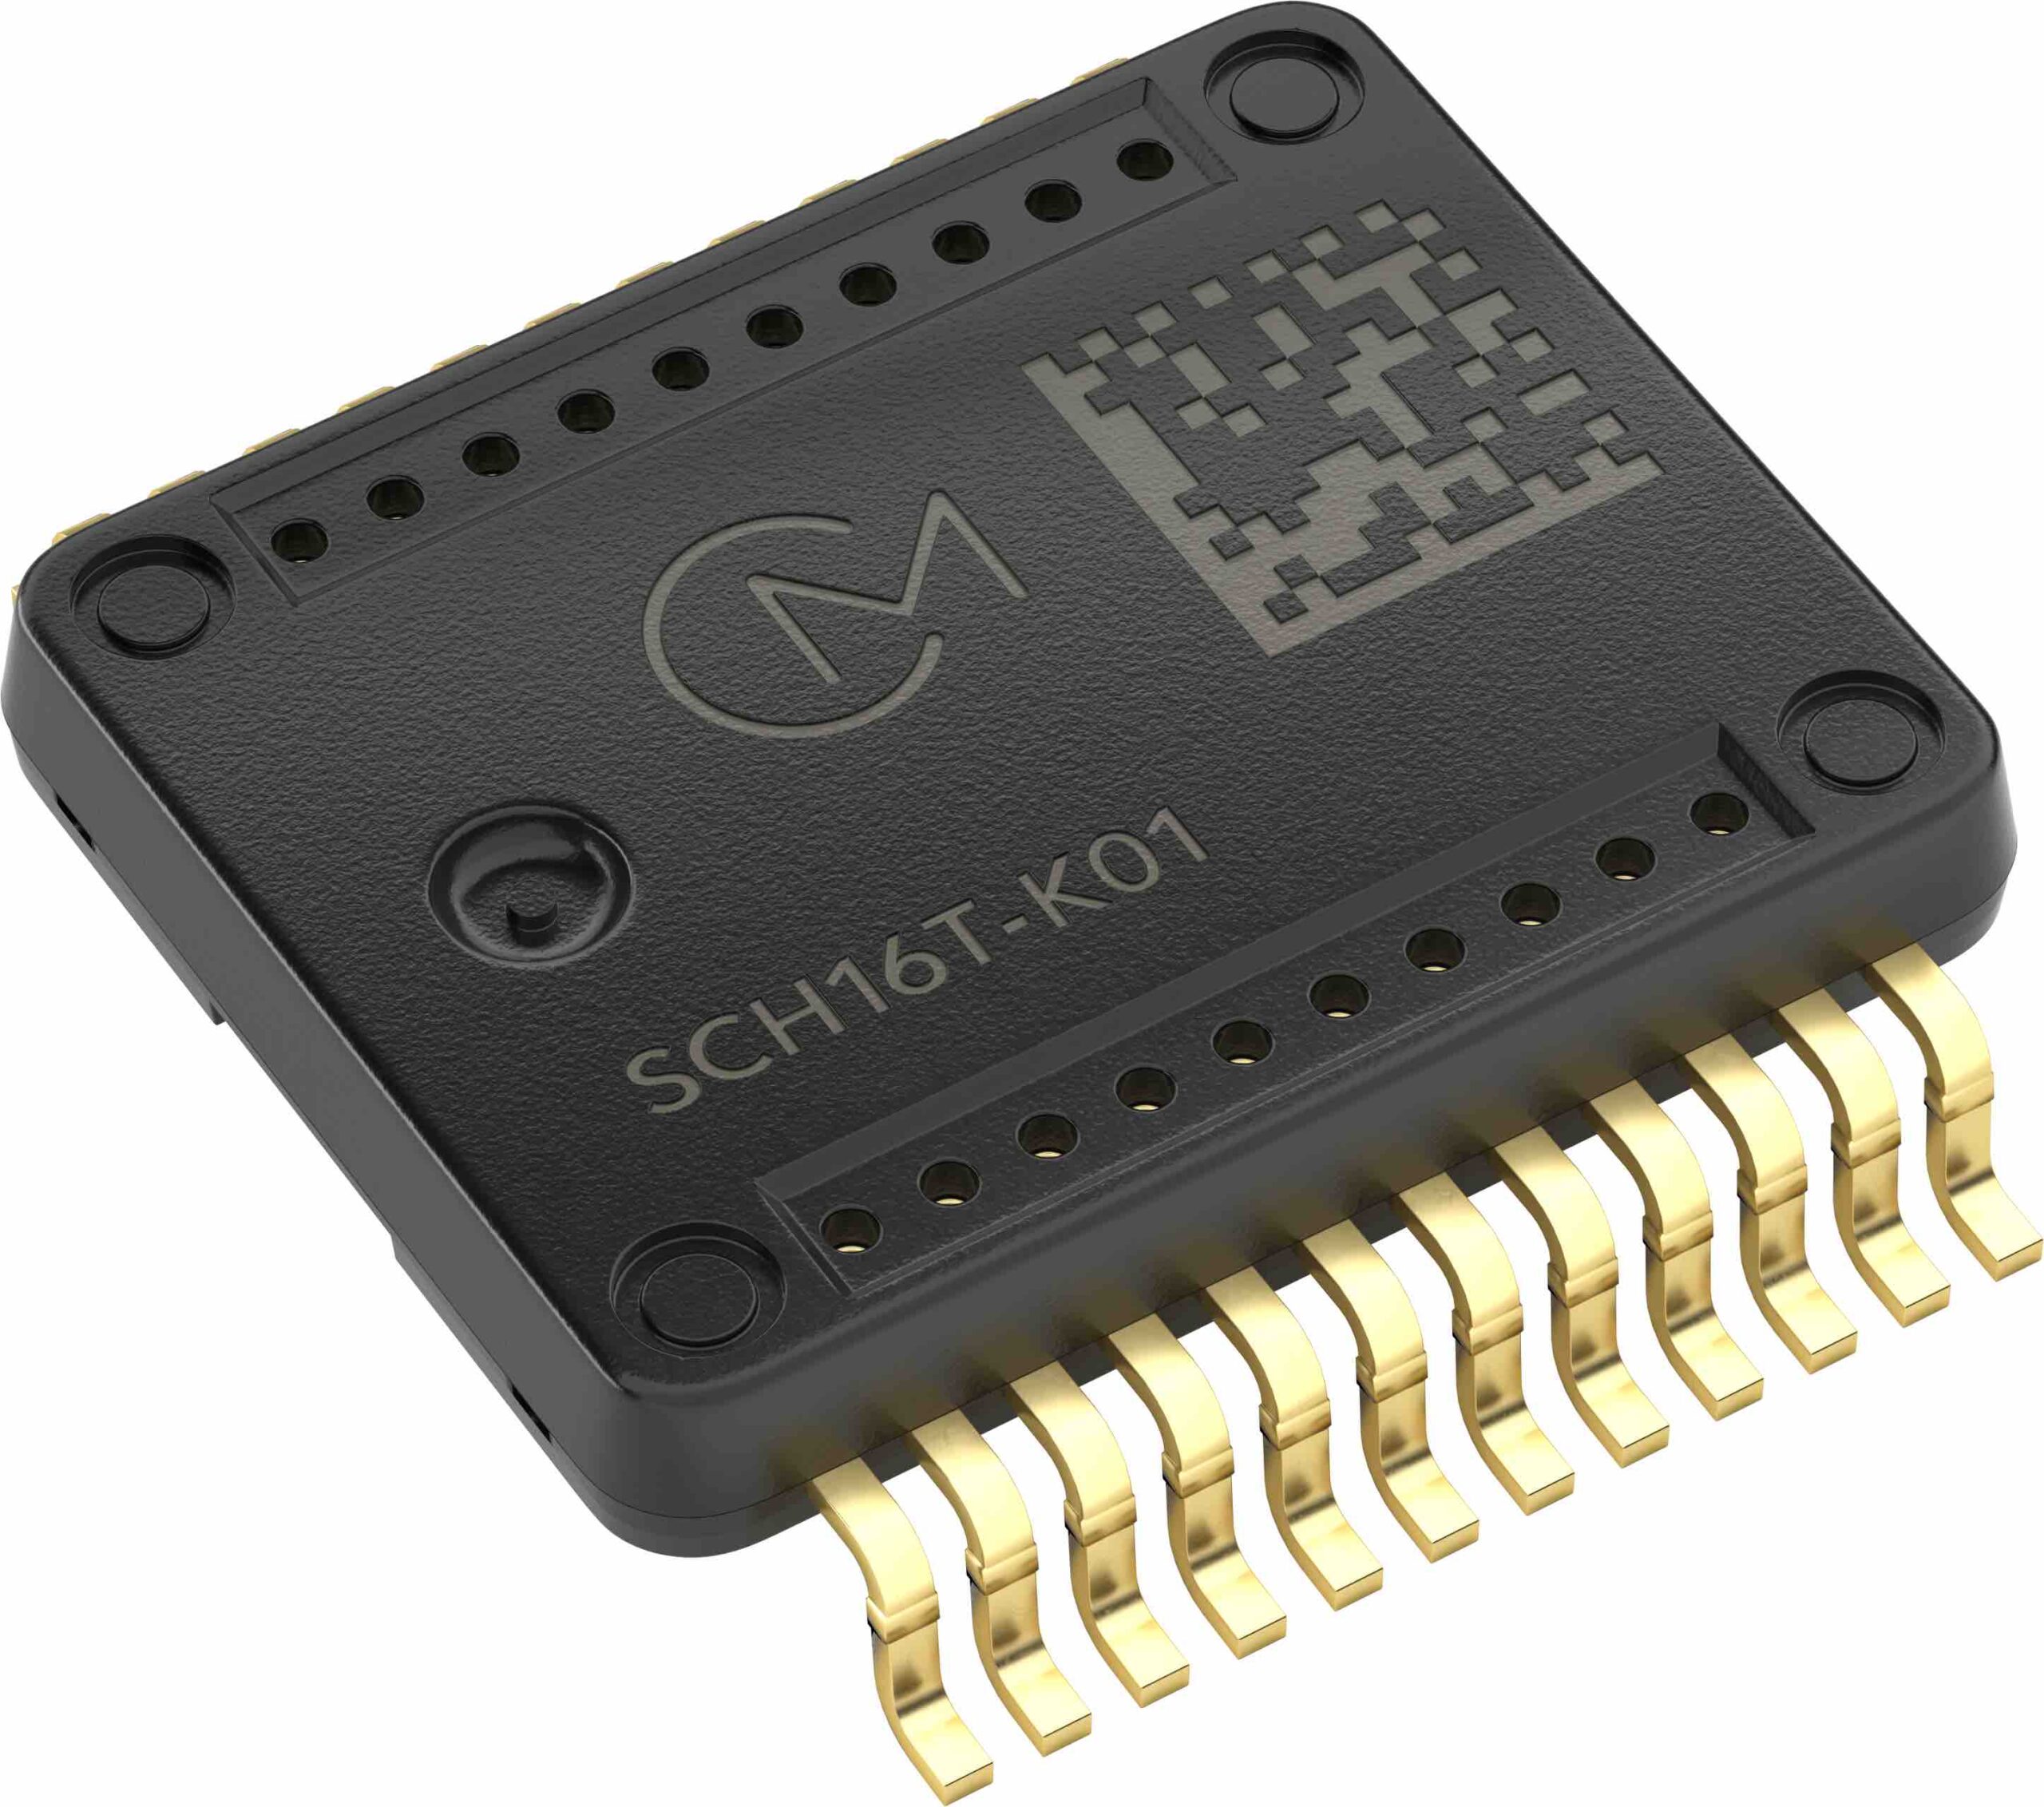 6DoF inertial sensor for high-precision machine control and positioning ...